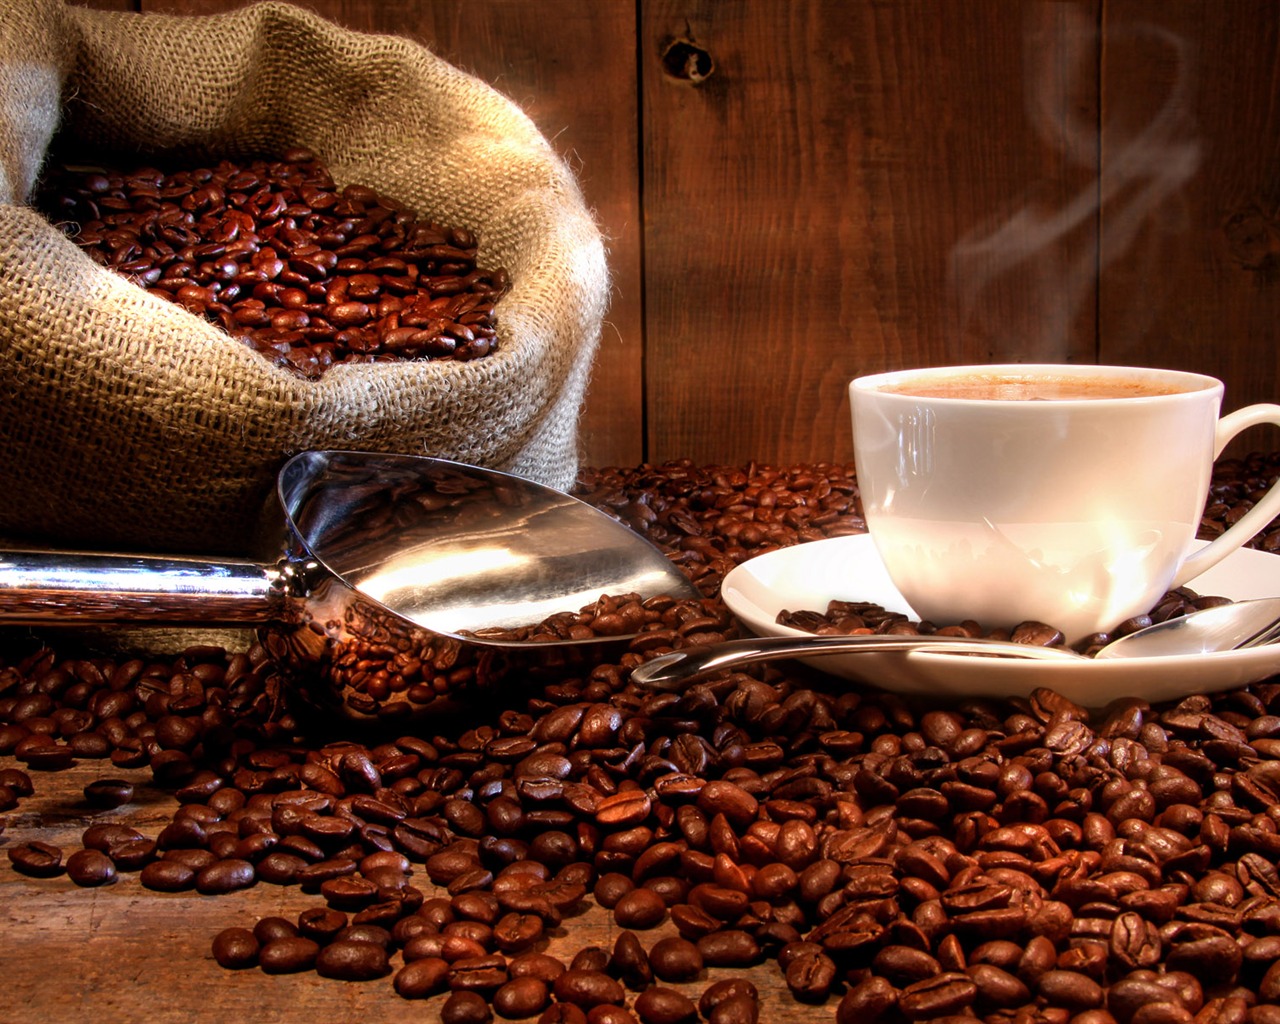 Coffee feature wallpaper (5) #1 - 1280x1024